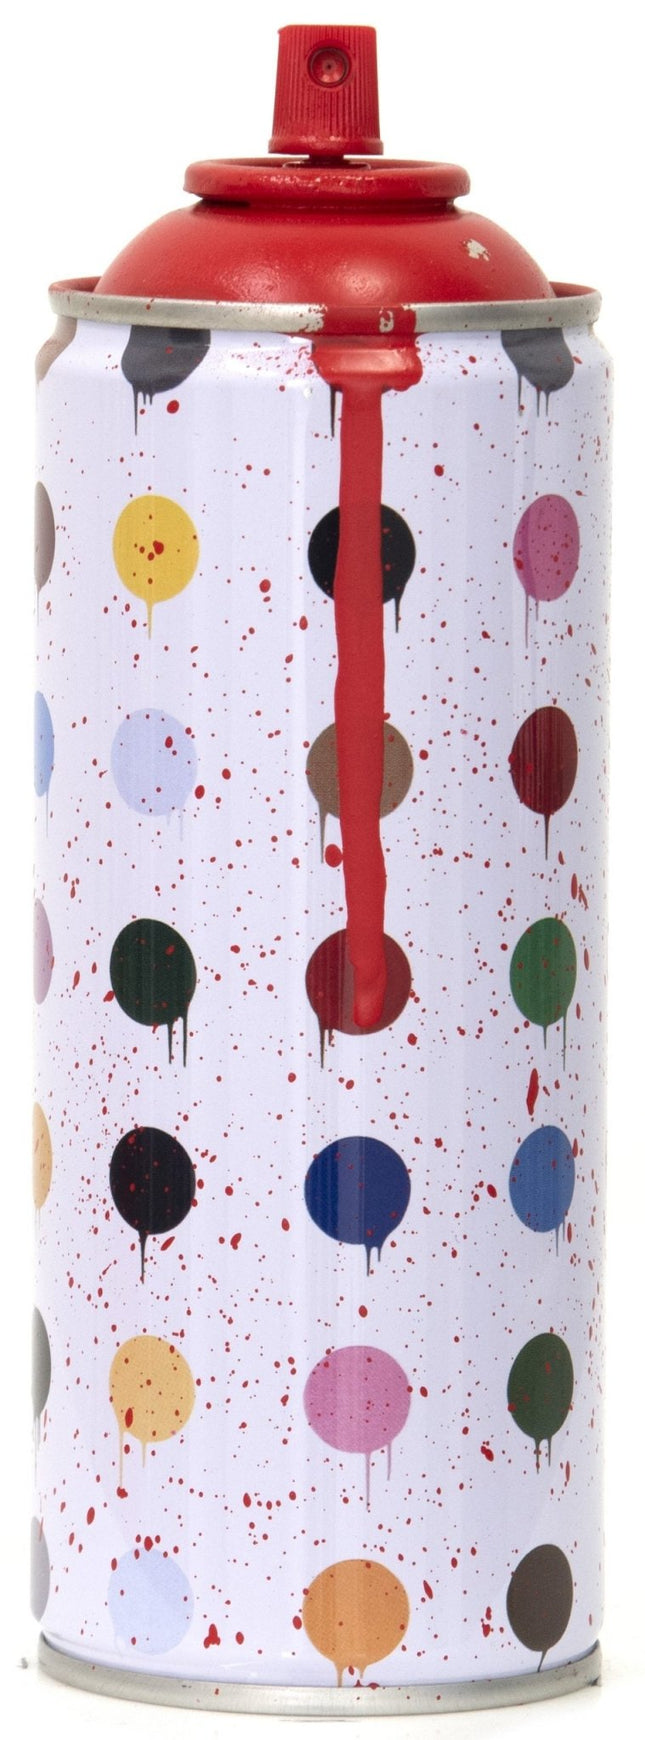 Hirst Dots Red Spray Paint Can Sculpture by Mr Brainwash- Thierry Guetta